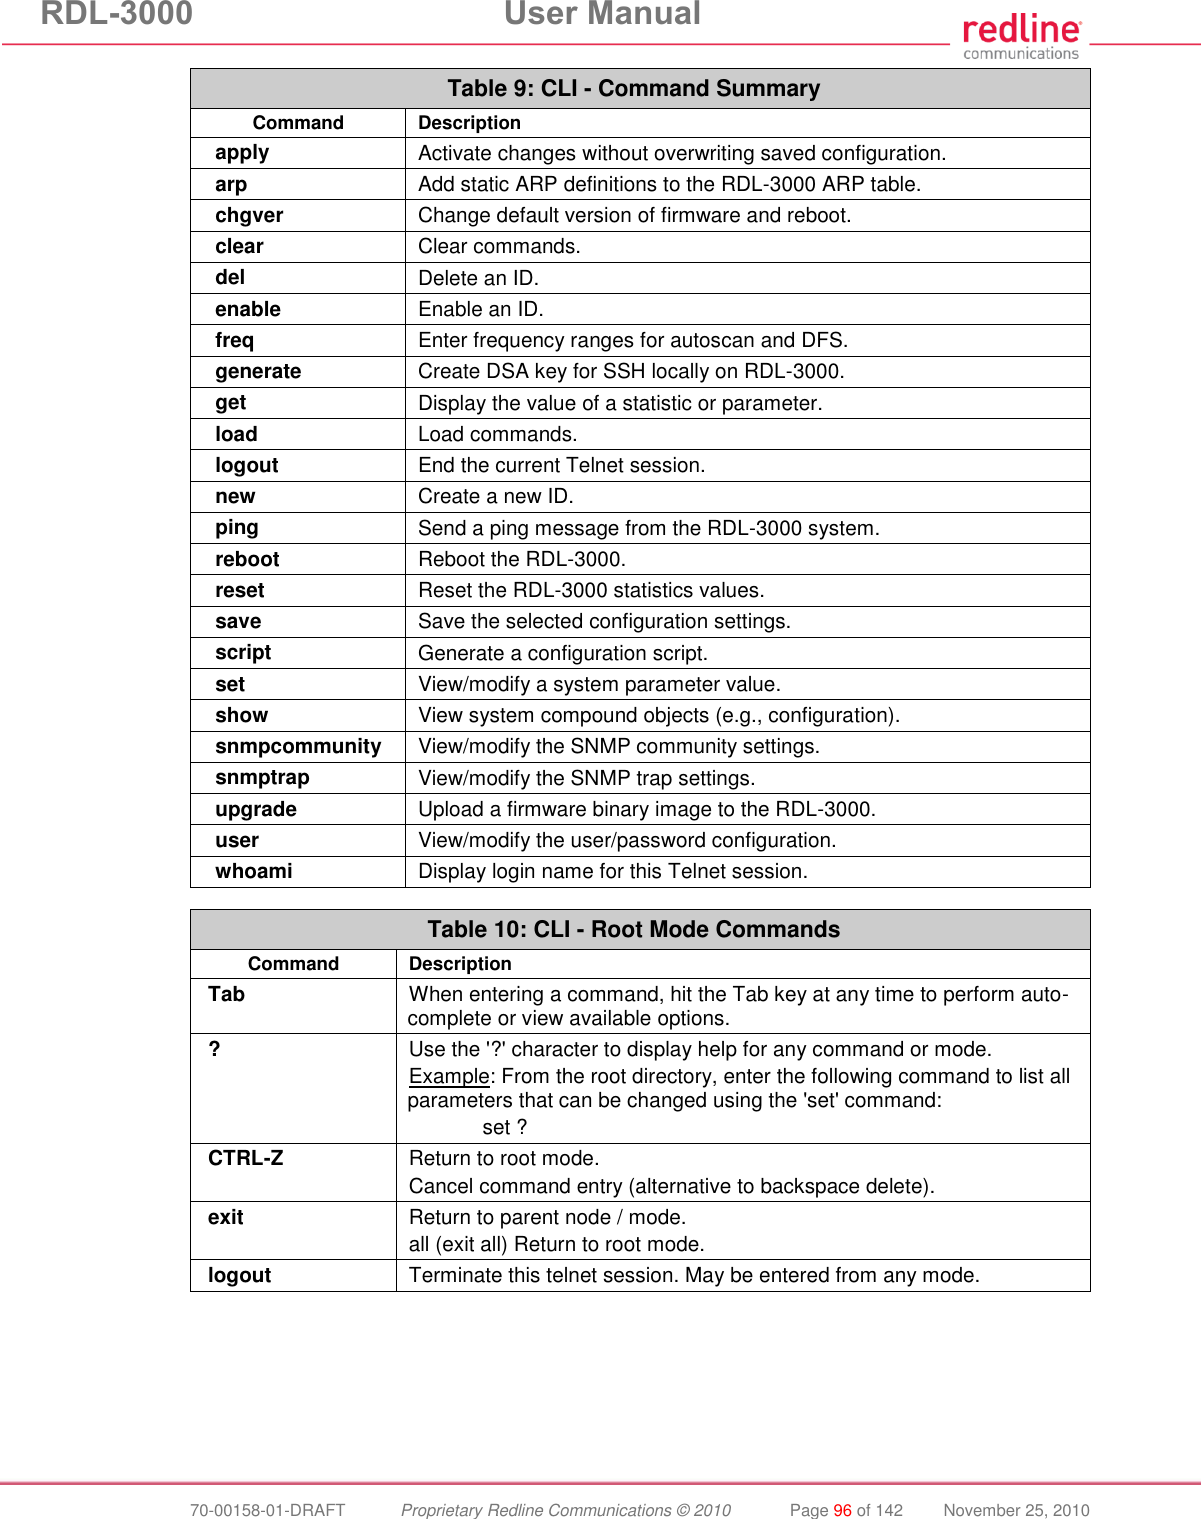 RDL-3000  User Manual  70-00158-01-DRAFT  Proprietary Redline Communications © 2010  Page 96 of 142  November 25, 2010 Table 9: CLI - Command Summary Command Description apply Activate changes without overwriting saved configuration. arp Add static ARP definitions to the RDL-3000 ARP table. chgver Change default version of firmware and reboot. clear Clear commands. del Delete an ID. enable Enable an ID. freq Enter frequency ranges for autoscan and DFS. generate Create DSA key for SSH locally on RDL-3000. get Display the value of a statistic or parameter.  load Load commands. logout End the current Telnet session. new Create a new ID. ping Send a ping message from the RDL-3000 system. reboot Reboot the RDL-3000. reset Reset the RDL-3000 statistics values. save Save the selected configuration settings. script Generate a configuration script. set View/modify a system parameter value. show View system compound objects (e.g., configuration). snmpcommunity View/modify the SNMP community settings. snmptrap View/modify the SNMP trap settings. upgrade Upload a firmware binary image to the RDL-3000. user View/modify the user/password configuration. whoami Display login name for this Telnet session.   Table 10: CLI - Root Mode Commands Command Description Tab When entering a command, hit the Tab key at any time to perform auto-complete or view available options. ? Use the &apos;?&apos; character to display help for any command or mode. Example: From the root directory, enter the following command to list all parameters that can be changed using the &apos;set&apos; command:   set ? CTRL-Z Return to root mode. Cancel command entry (alternative to backspace delete). exit  Return to parent node / mode. all (exit all) Return to root mode. logout Terminate this telnet session. May be entered from any mode.   